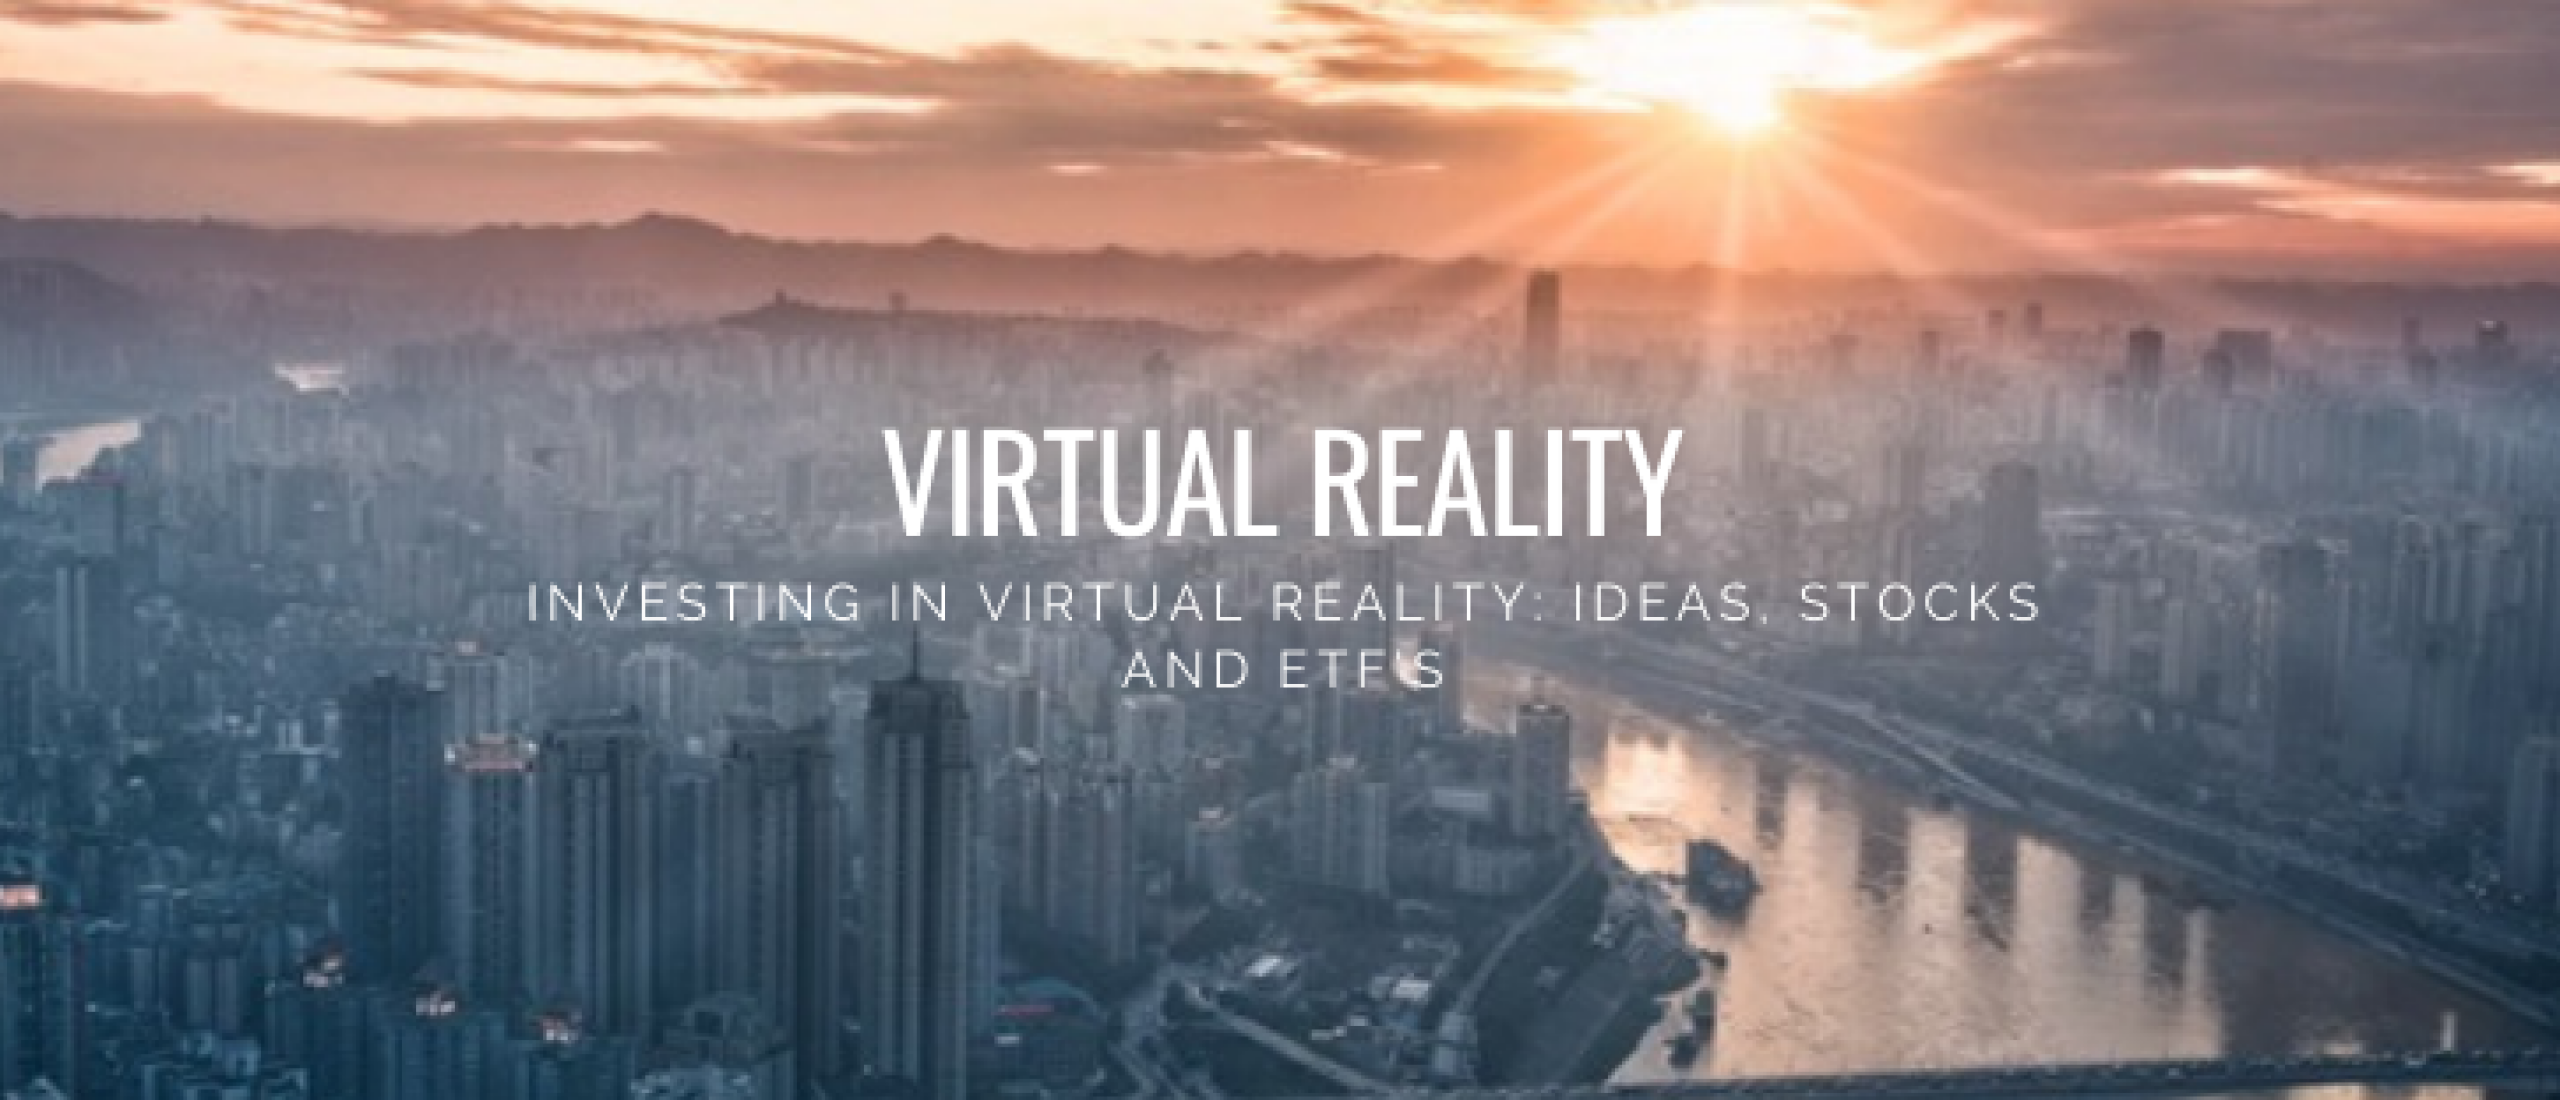 Invest in Virtual Reality: Ideas, Stocks, ETF’s & More